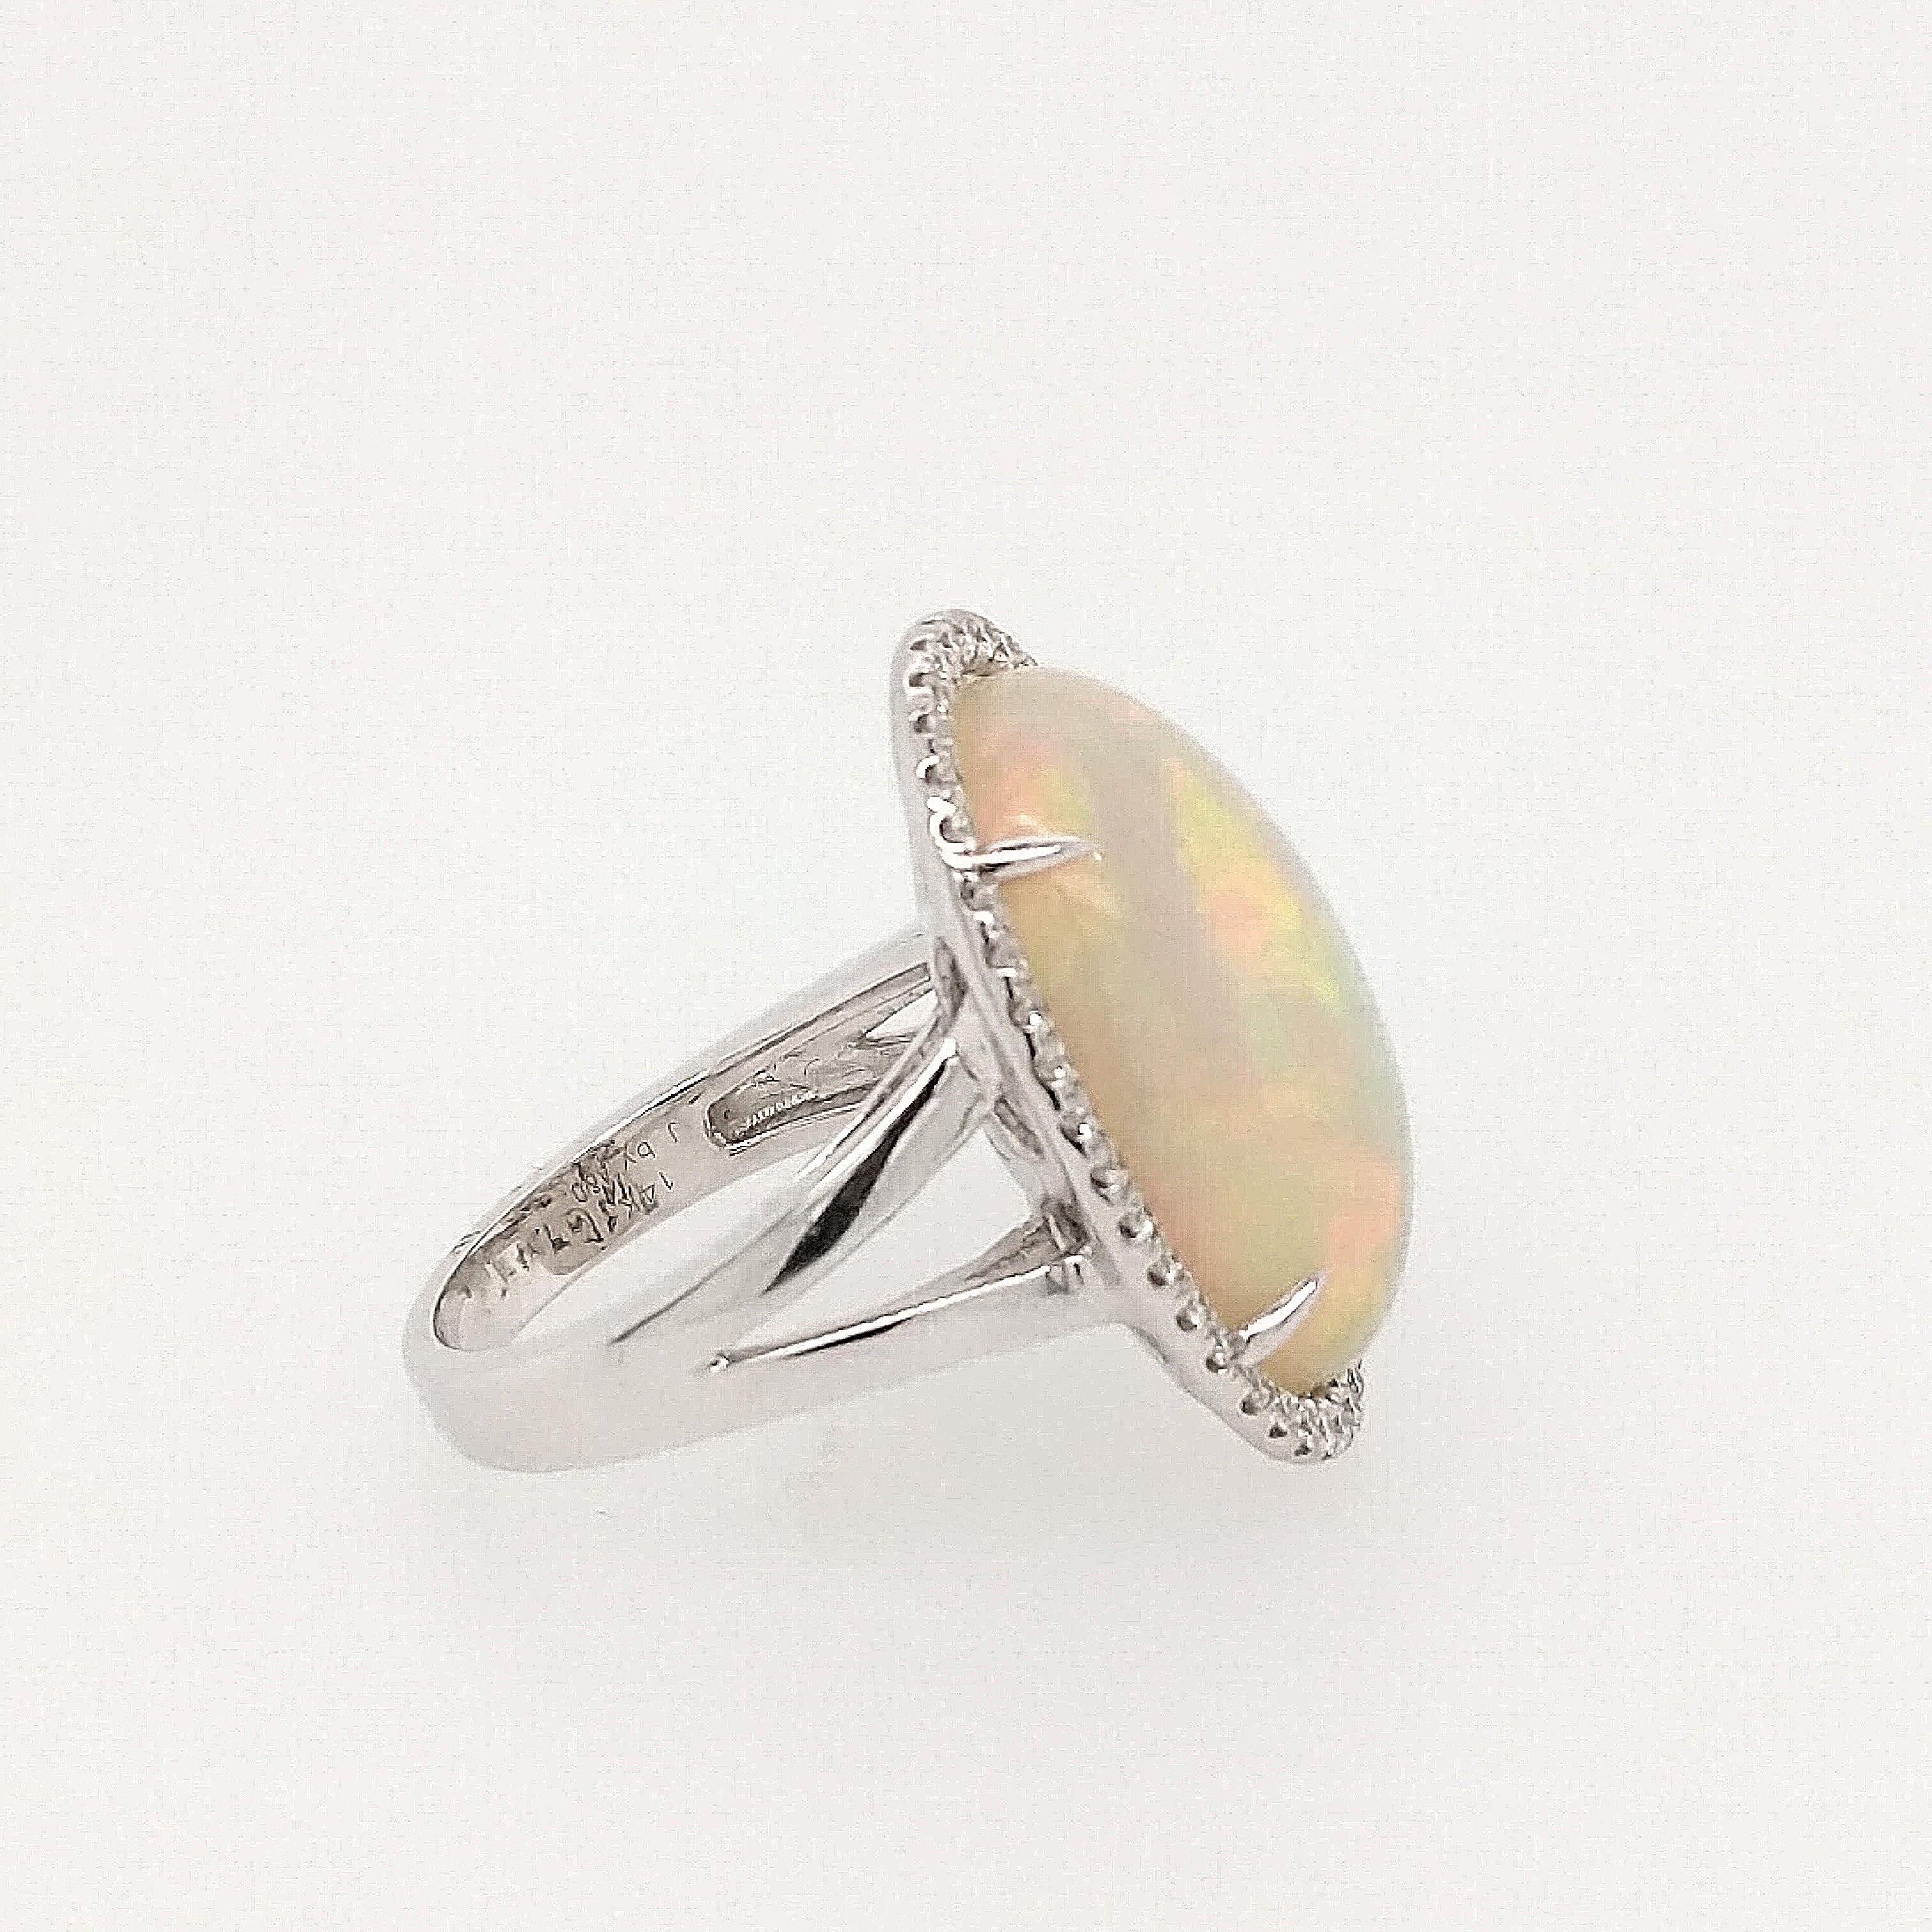 This Opal and diamond ring is crafted in 14k white gold and features (1) cabochon opal weighing 10.77ct with dominant colors of green, orange, red, blue and white. The center stone is surrounded by (42) round brilliant diamonds weighing